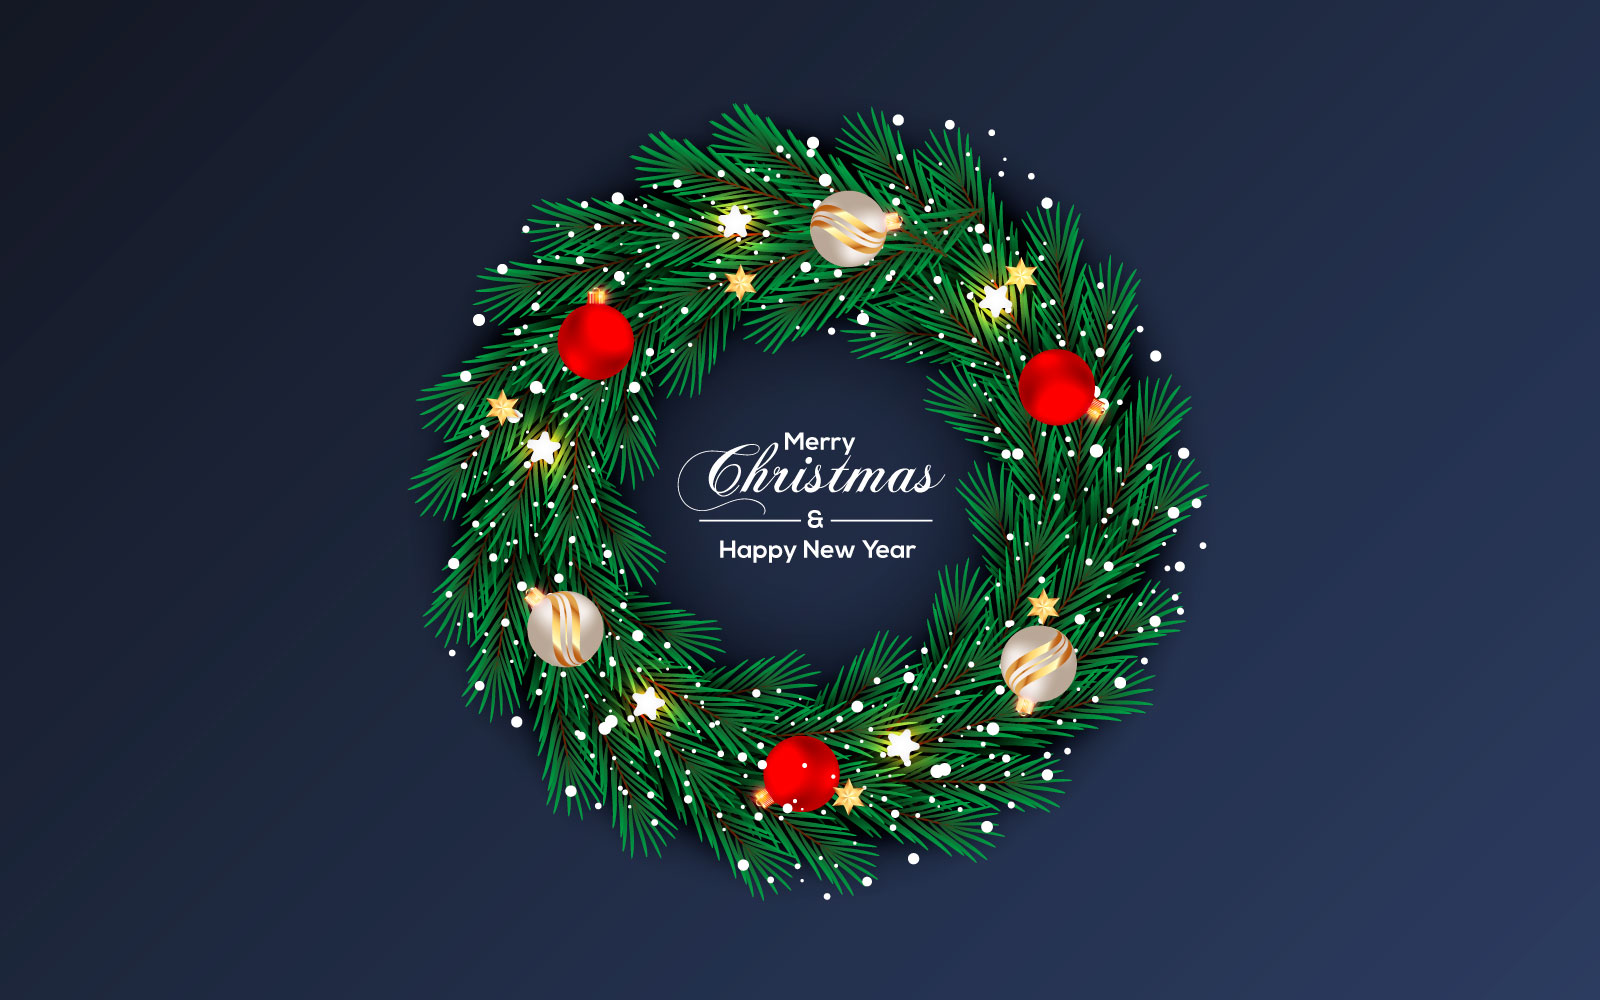 Christmas wreath vector design merry christmas text with  elements for xmas greeting card